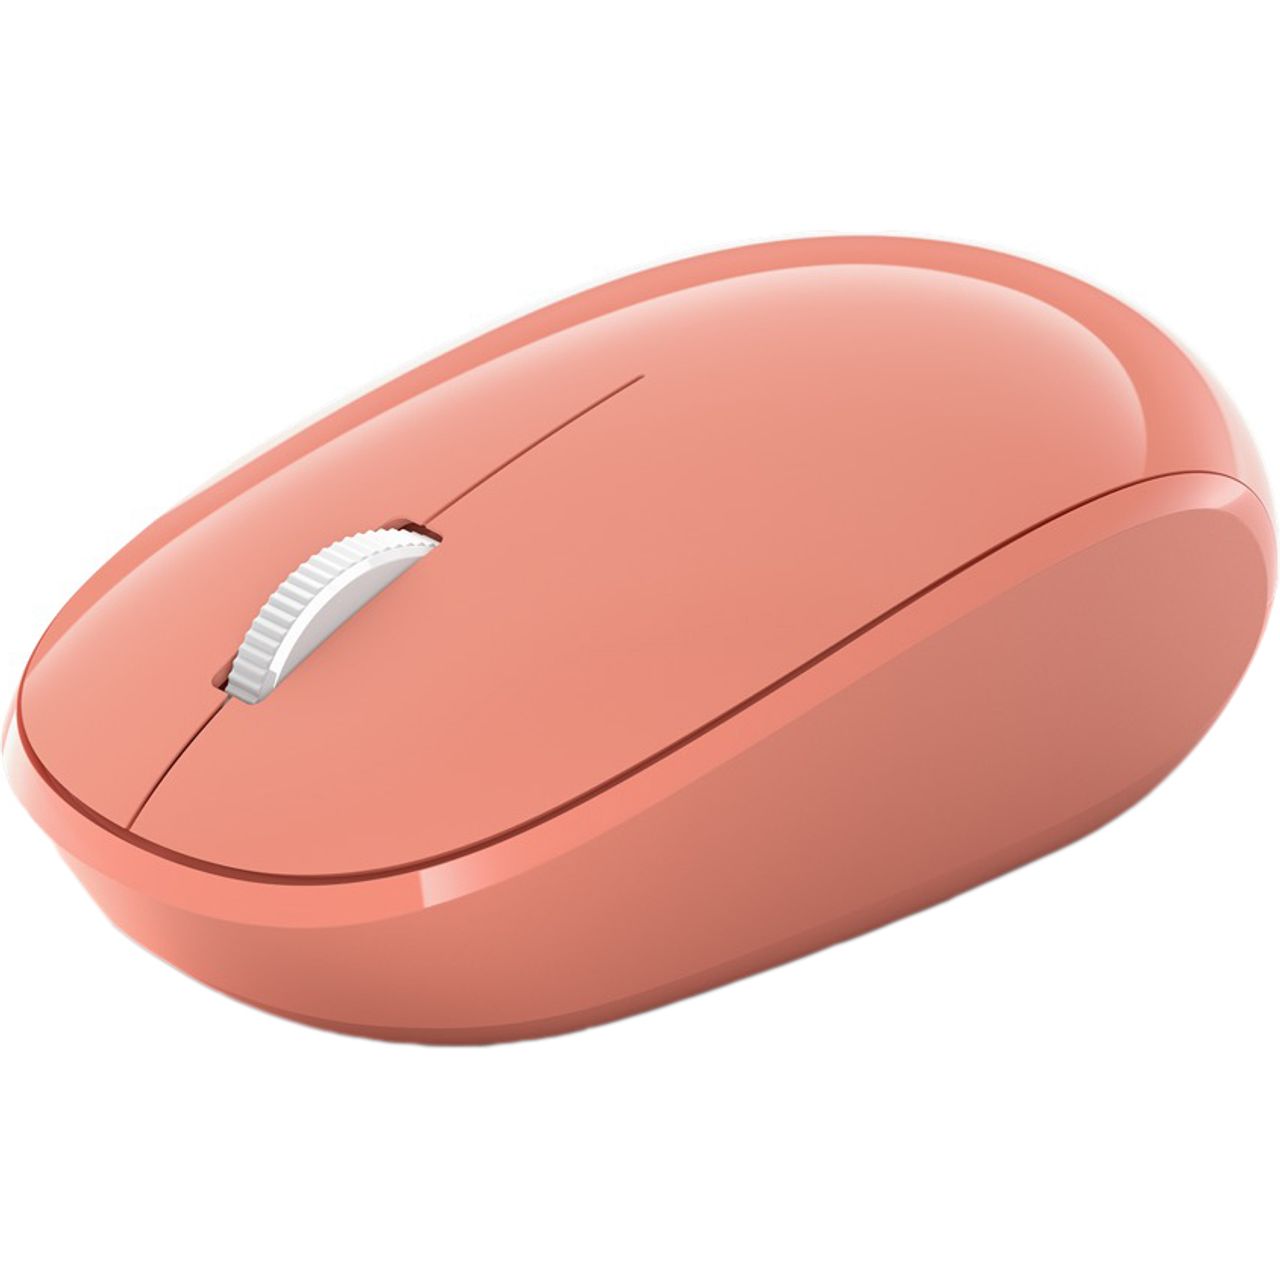 Microsoft Bluetooth Mouse Review